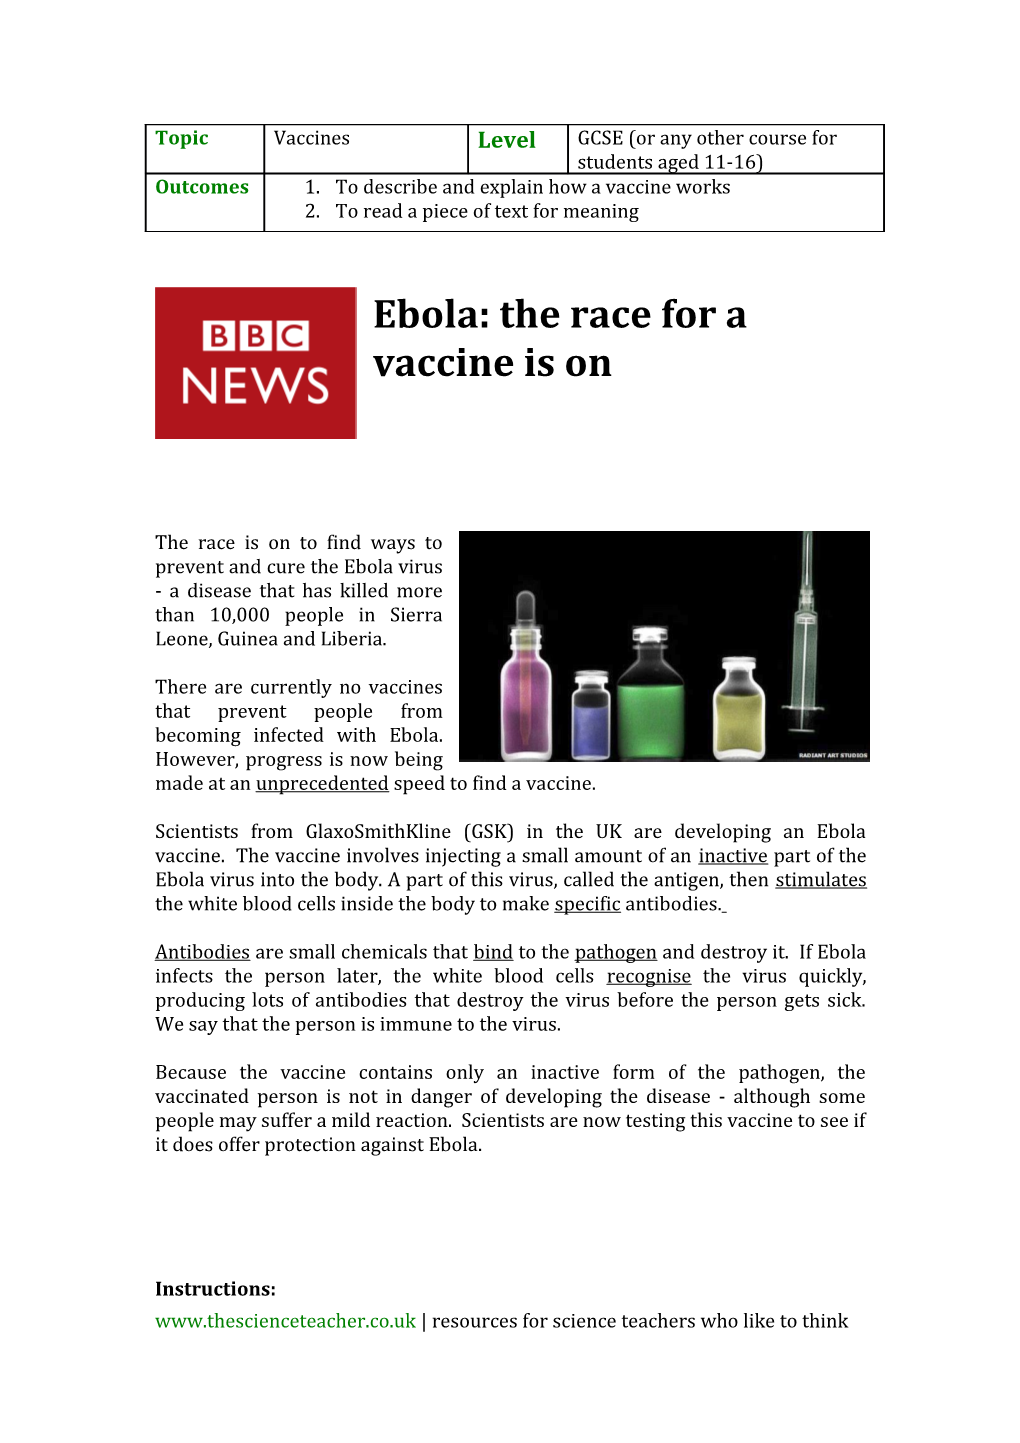 Ebola: the Race for a Vaccine Is On